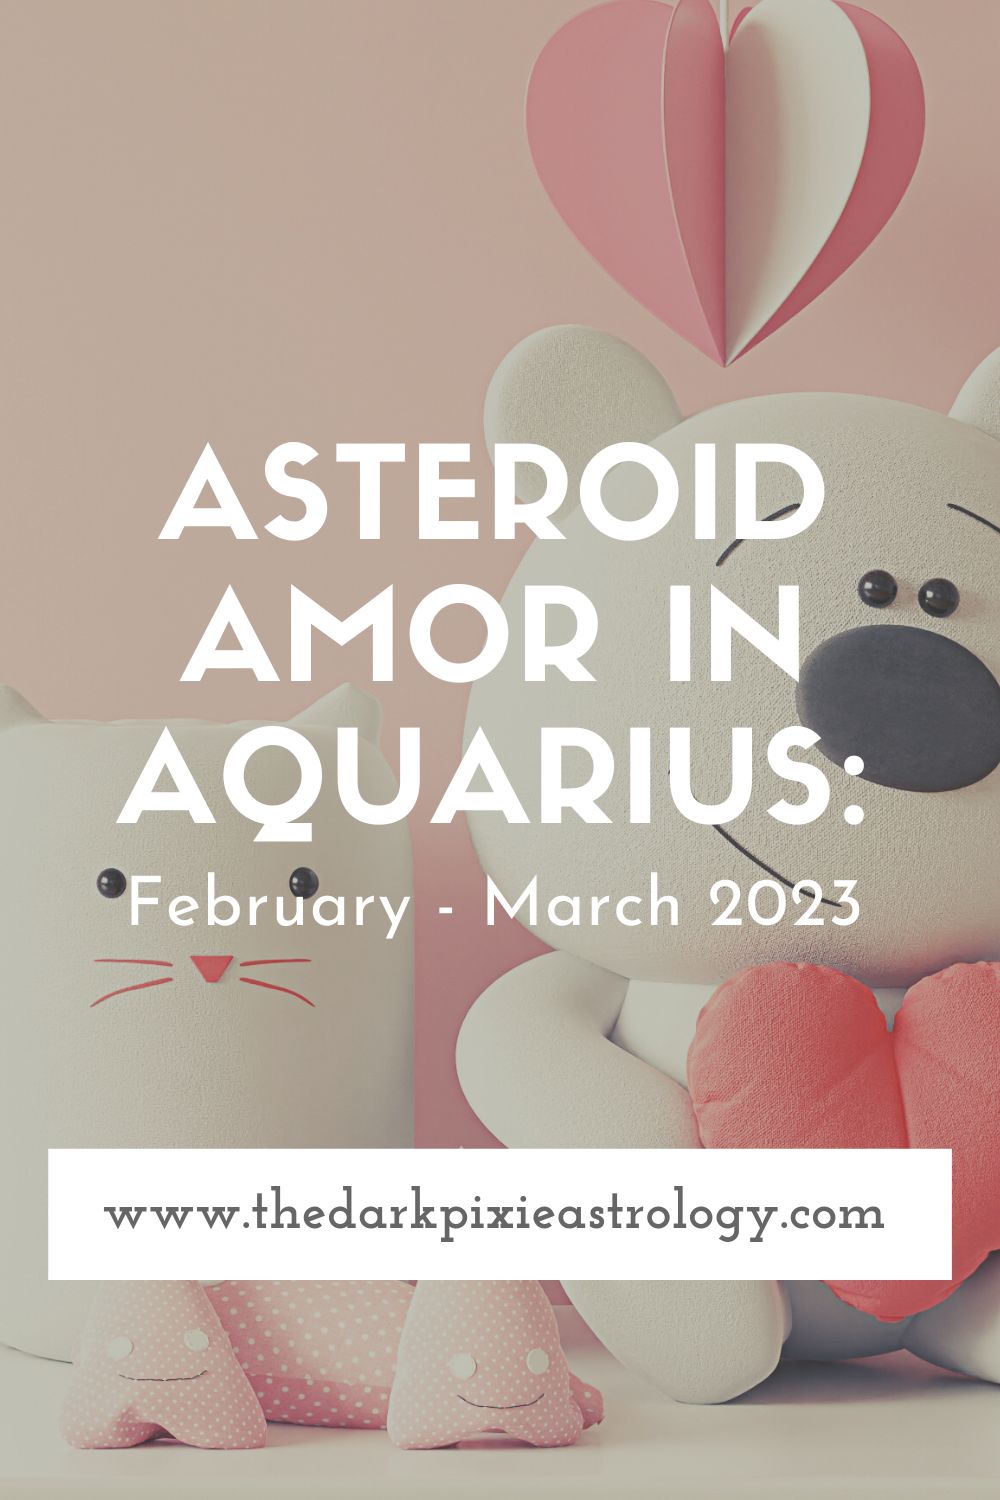 Asteroid Amor in Aquarius: February - March 2023 - The Dark Pixie Astrology